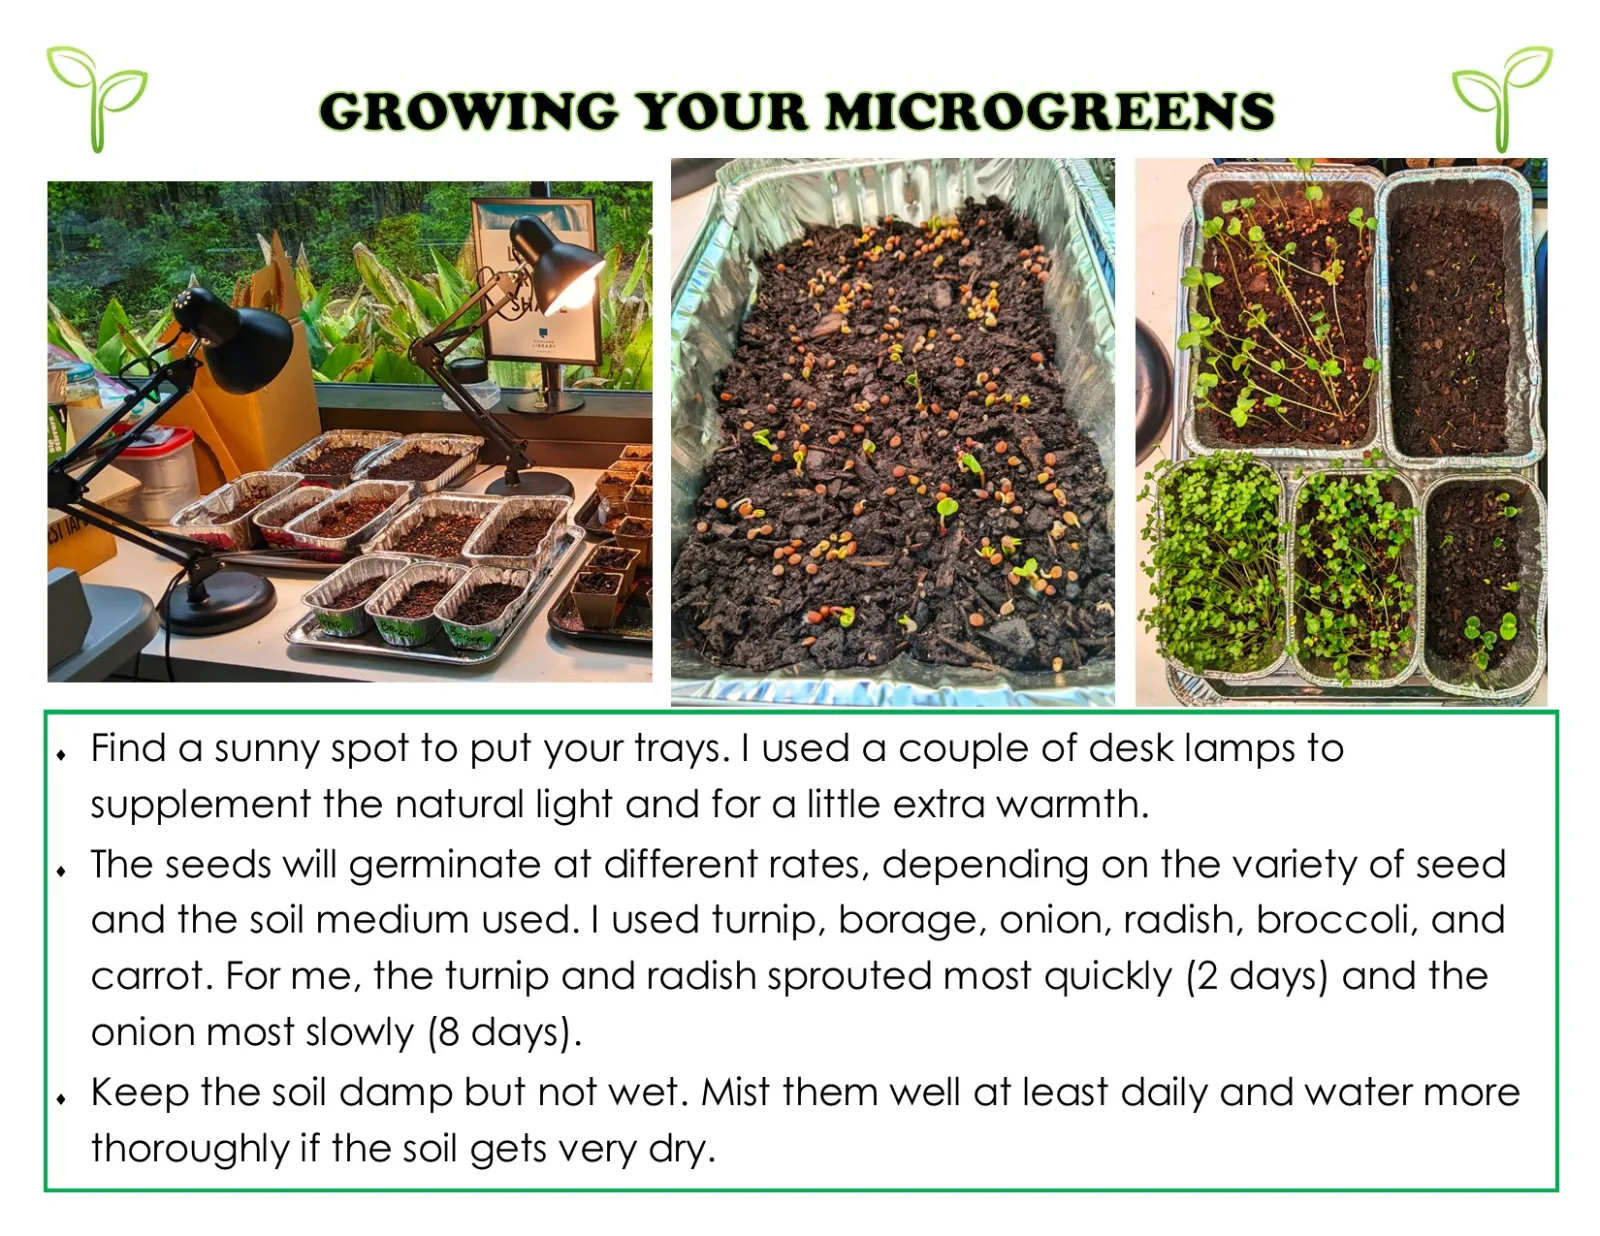 This is a wall of text about growing and caring for microgreens